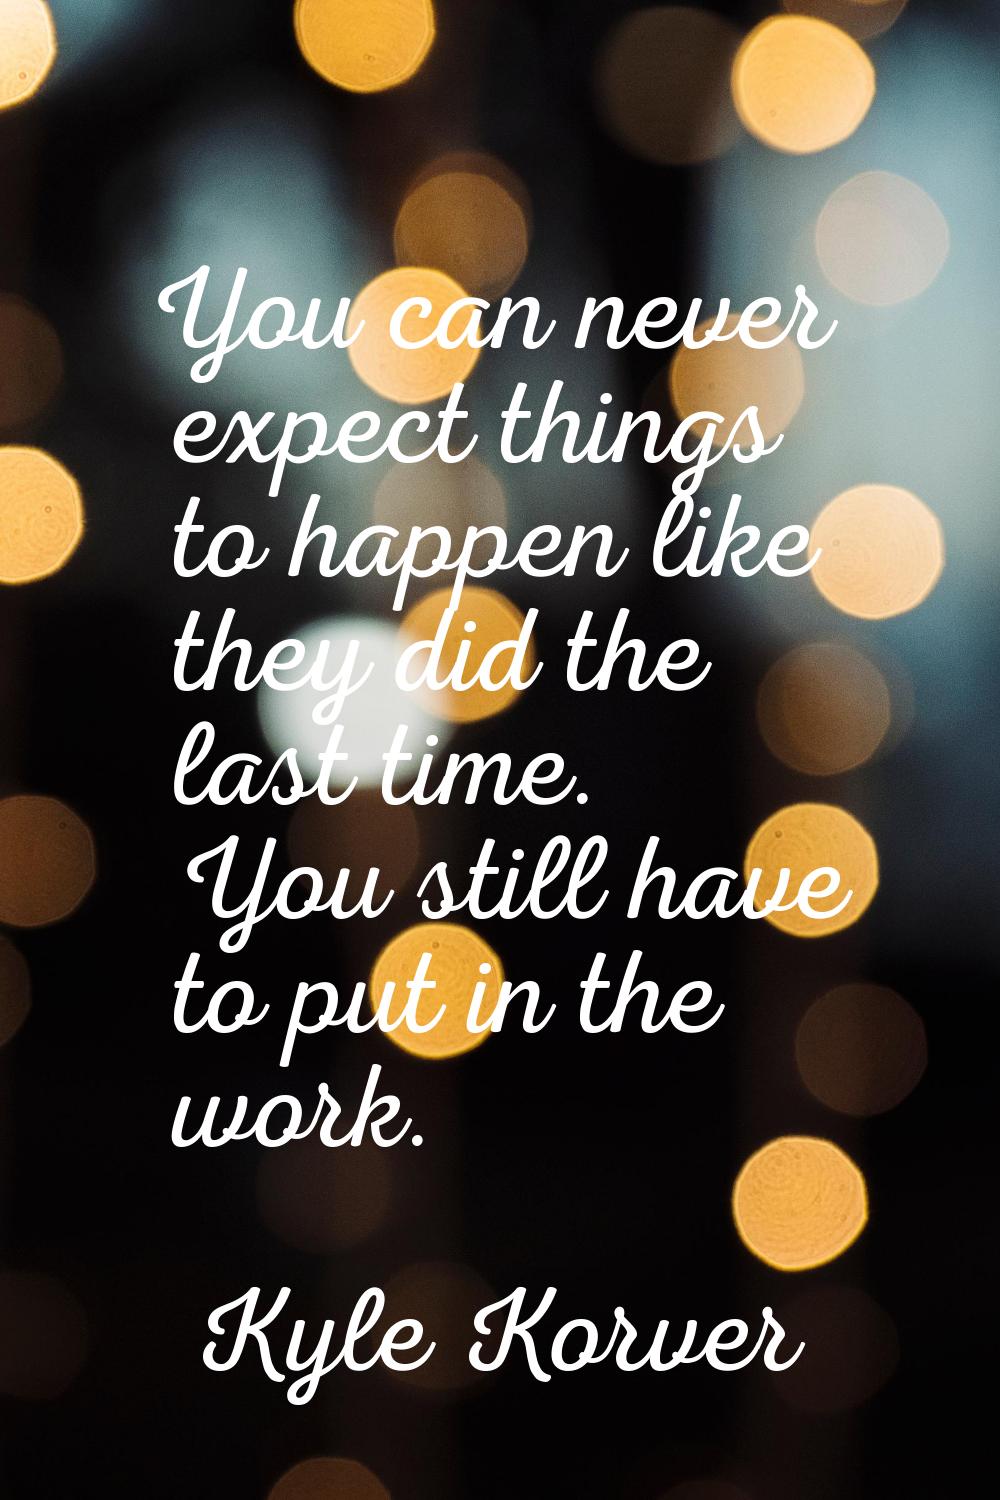 You can never expect things to happen like they did the last time. You still have to put in the wor